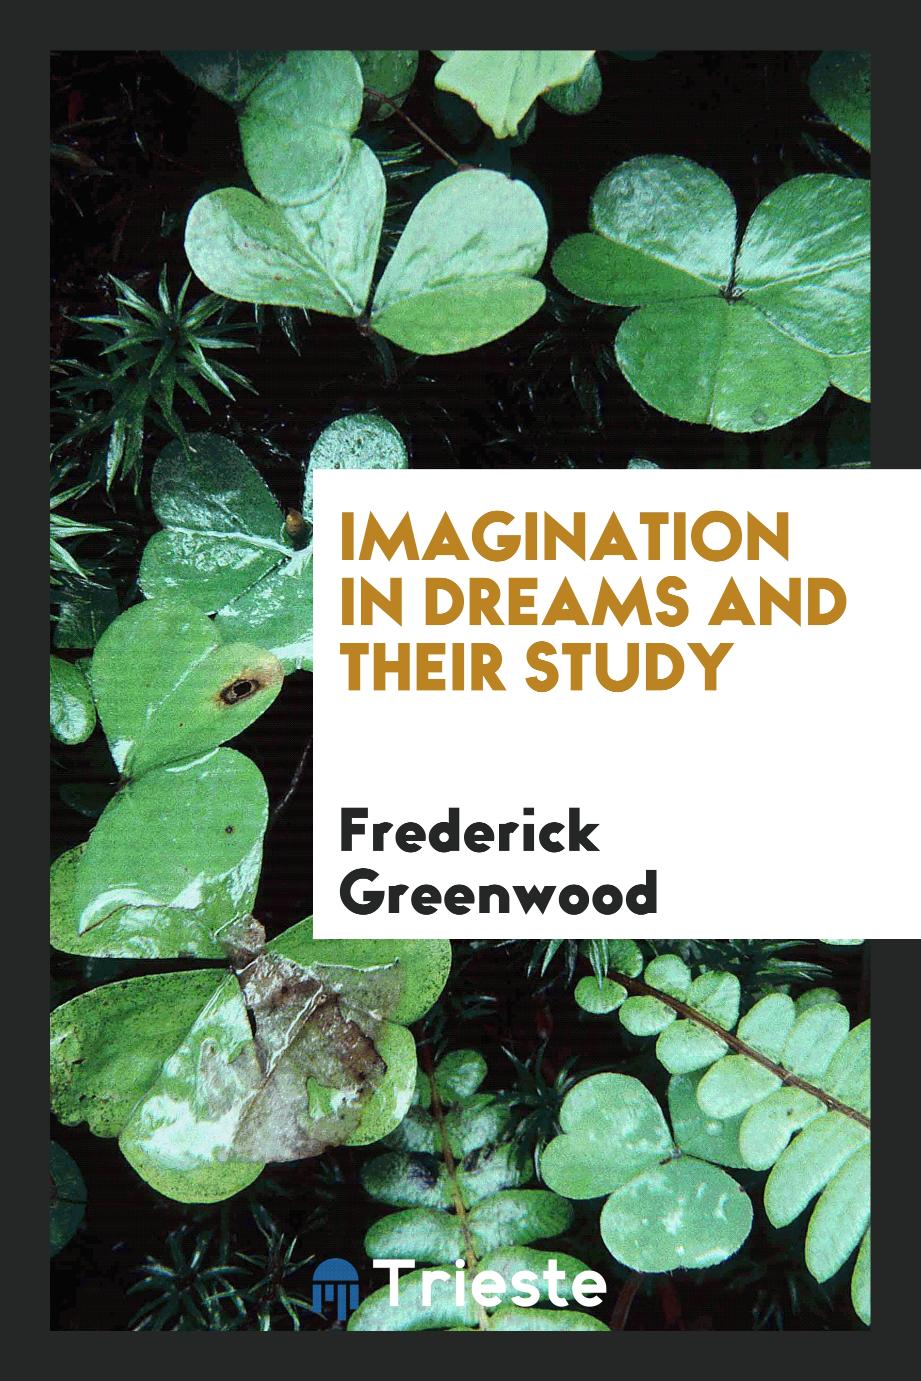 Imagination in dreams and their study